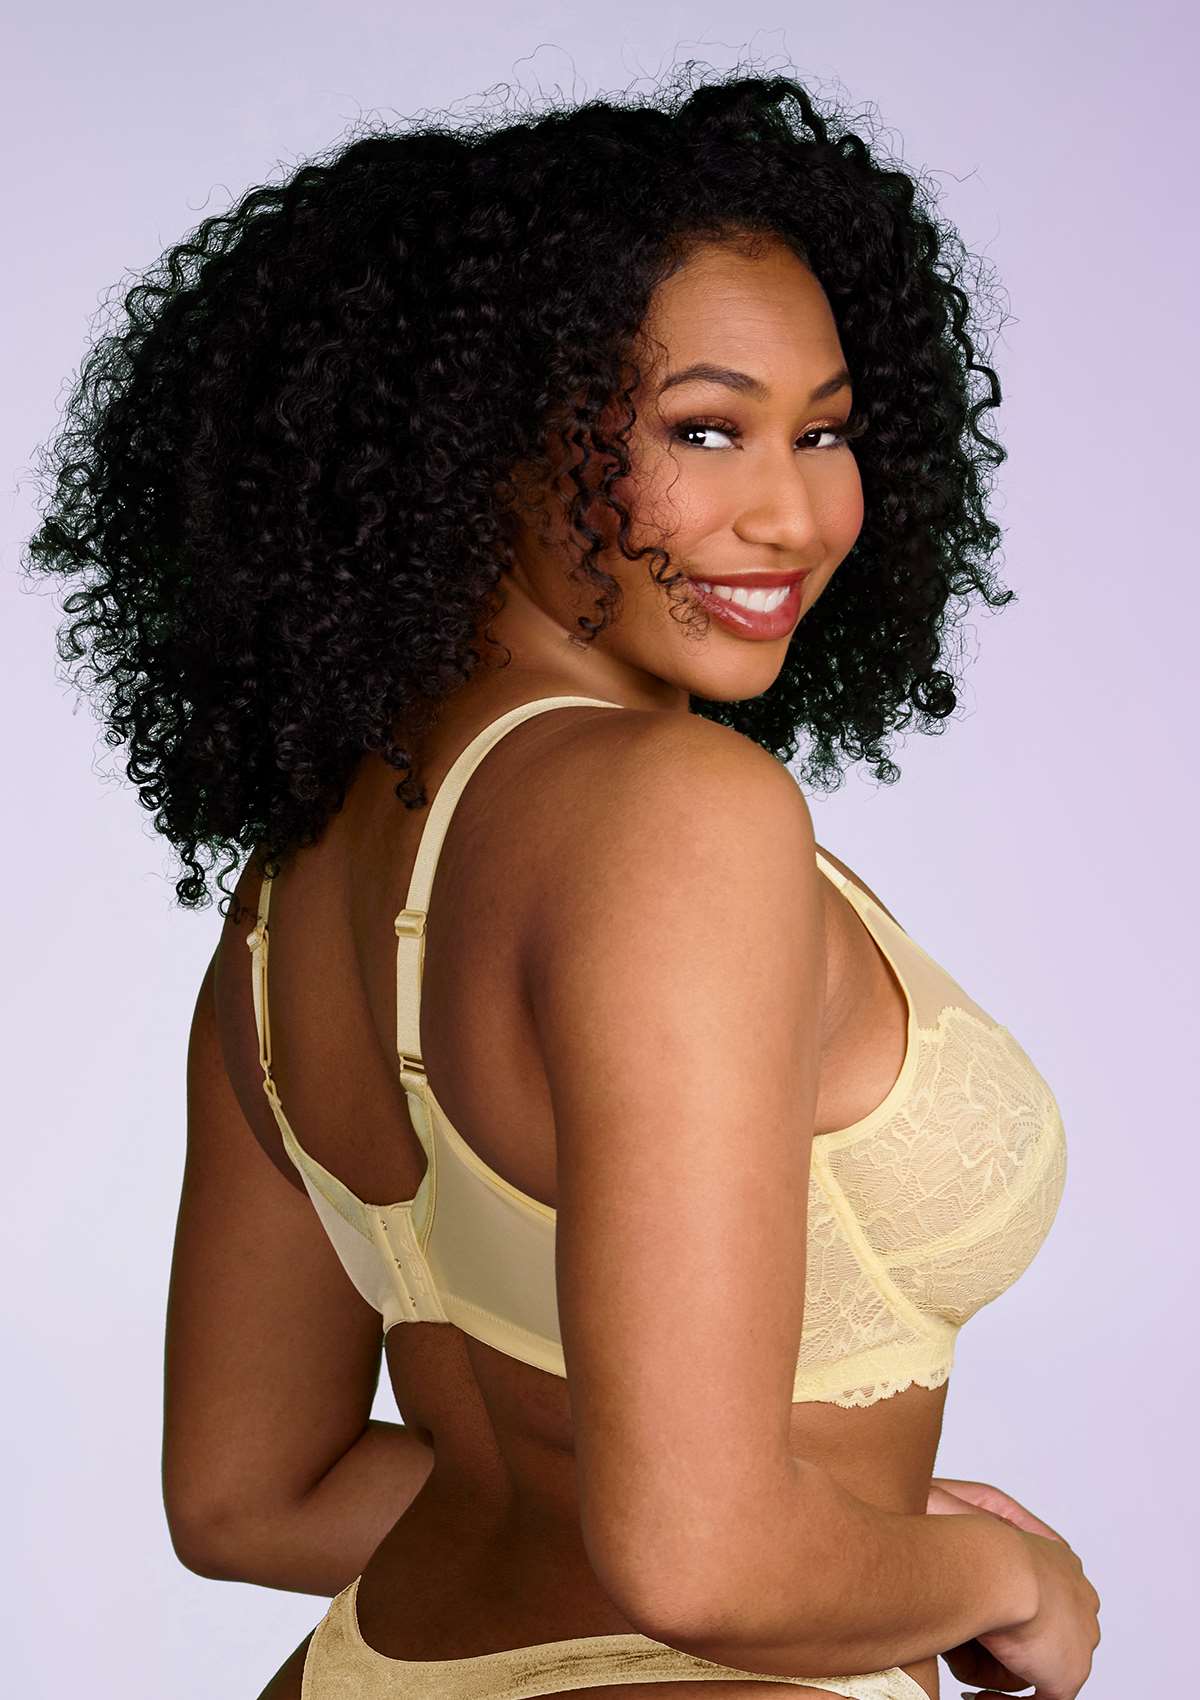 HSIA Blossom Full Coverage Side Support Bra: Designed For Heavy Busts - Beige / 38 / C